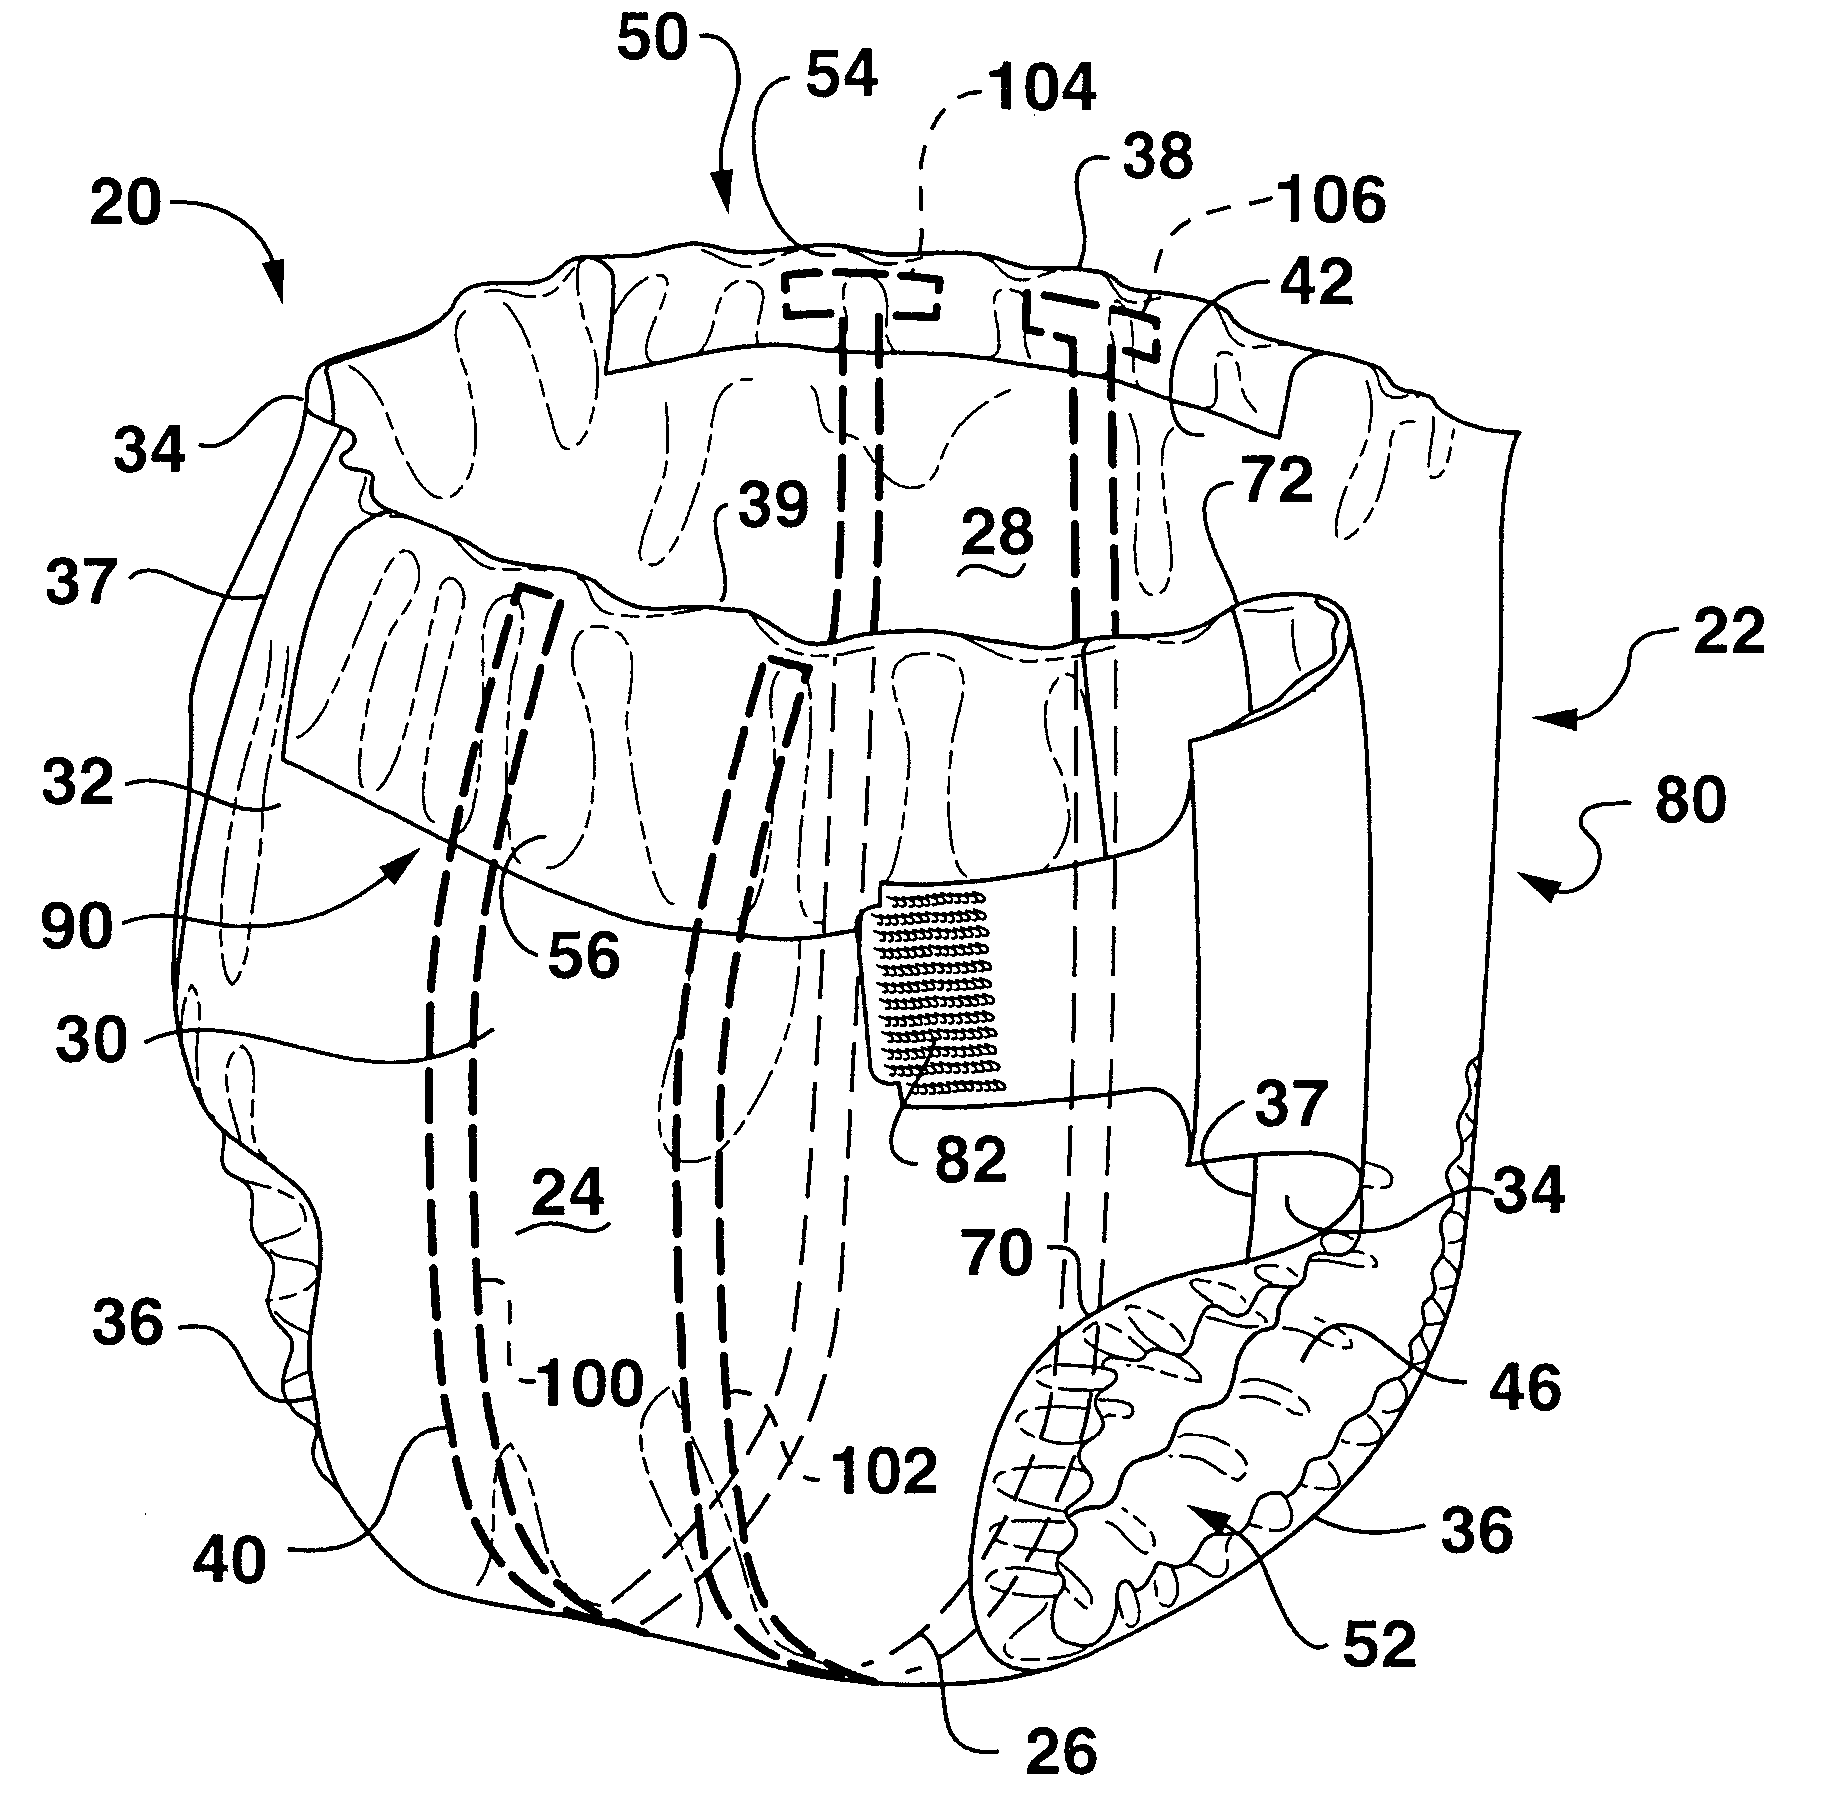 Connection mechanisms in absorbent articles for body fluid signaling devices